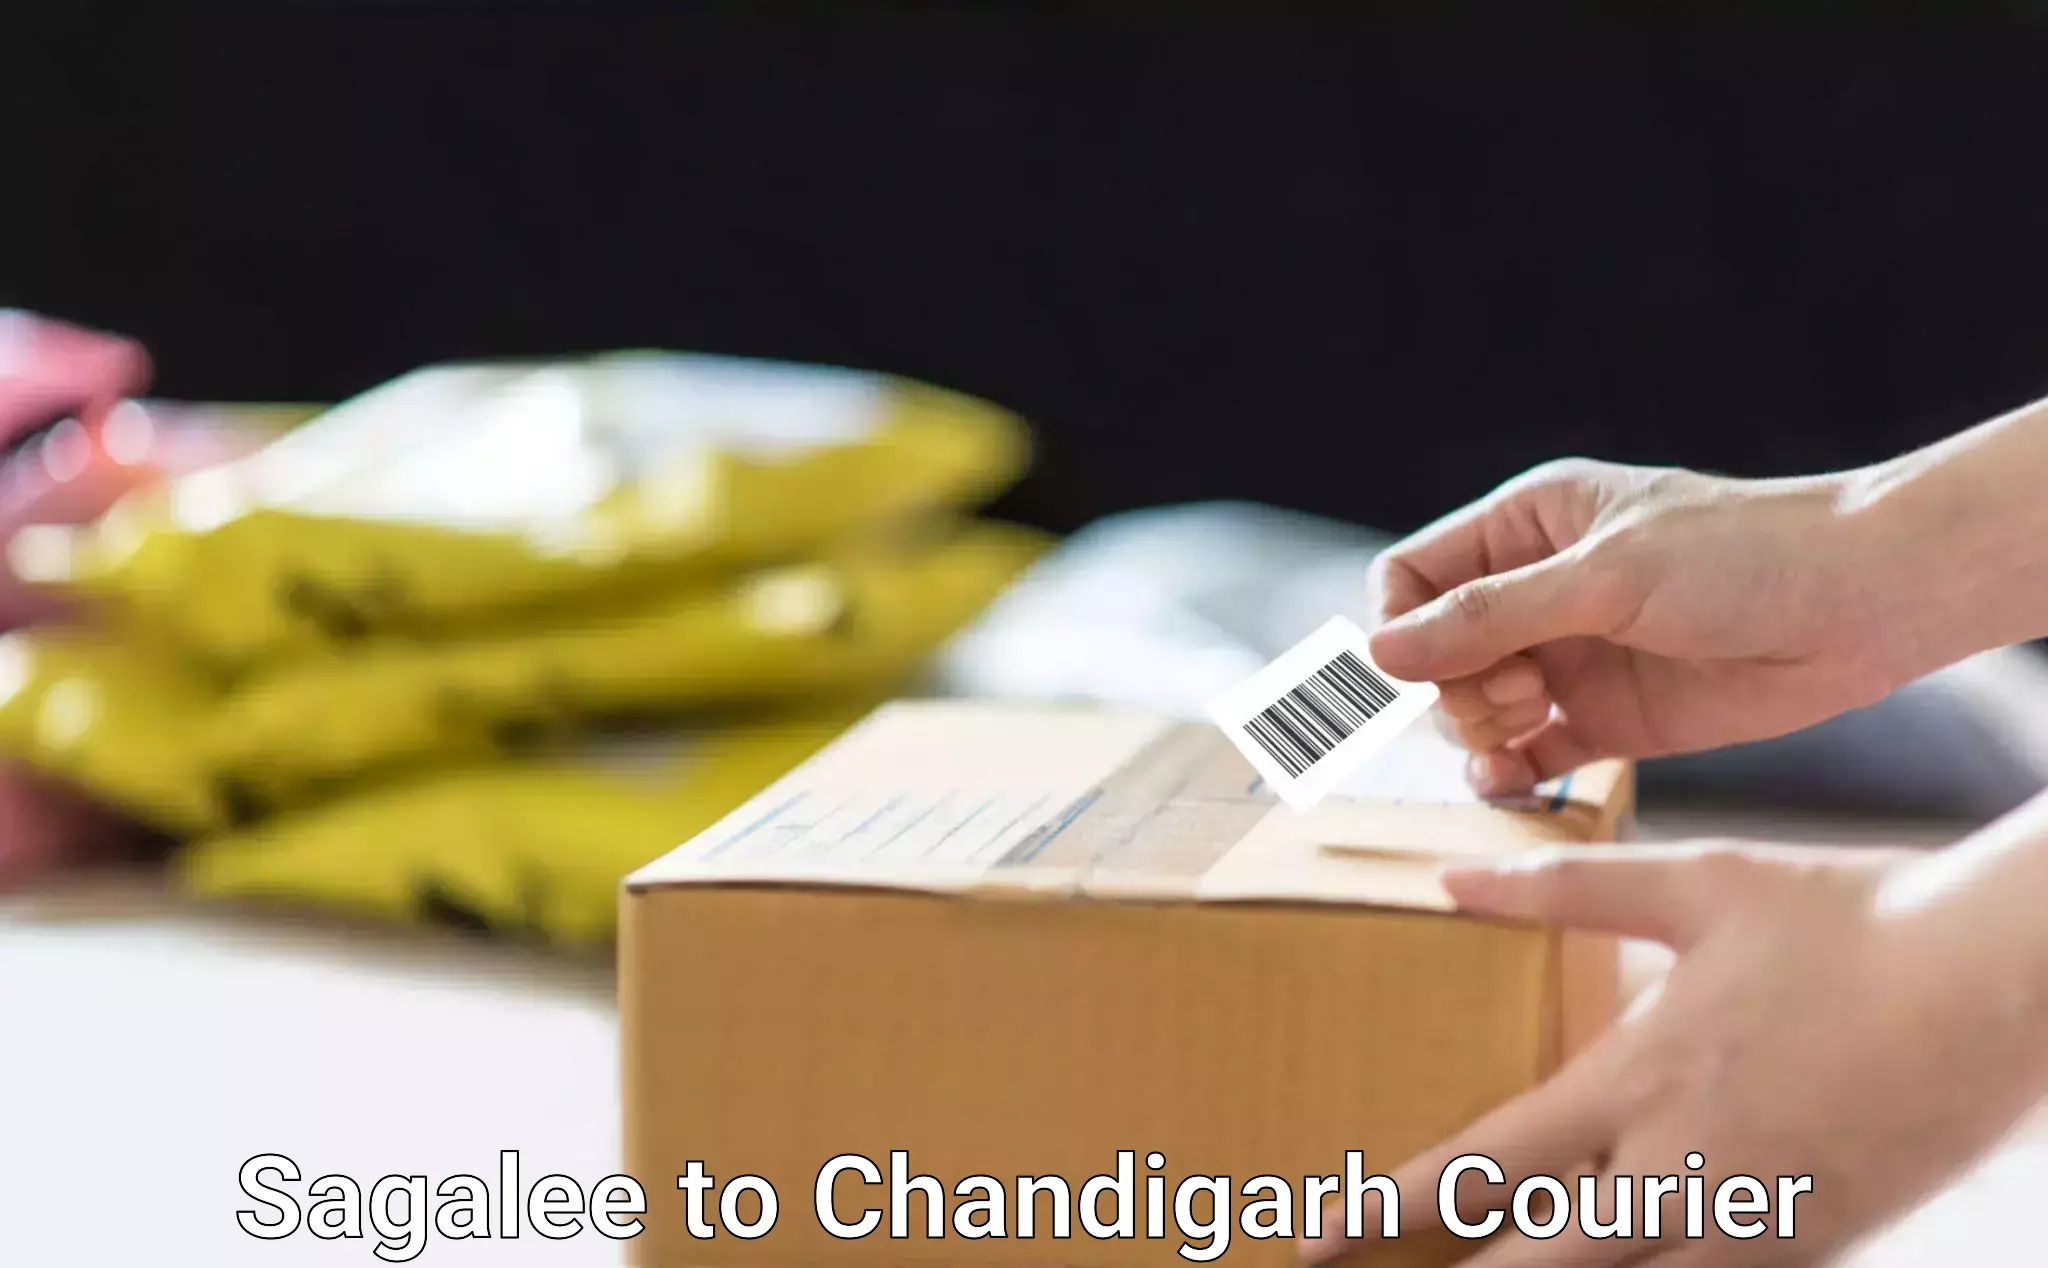 Fragile item shipping Sagalee to Chandigarh